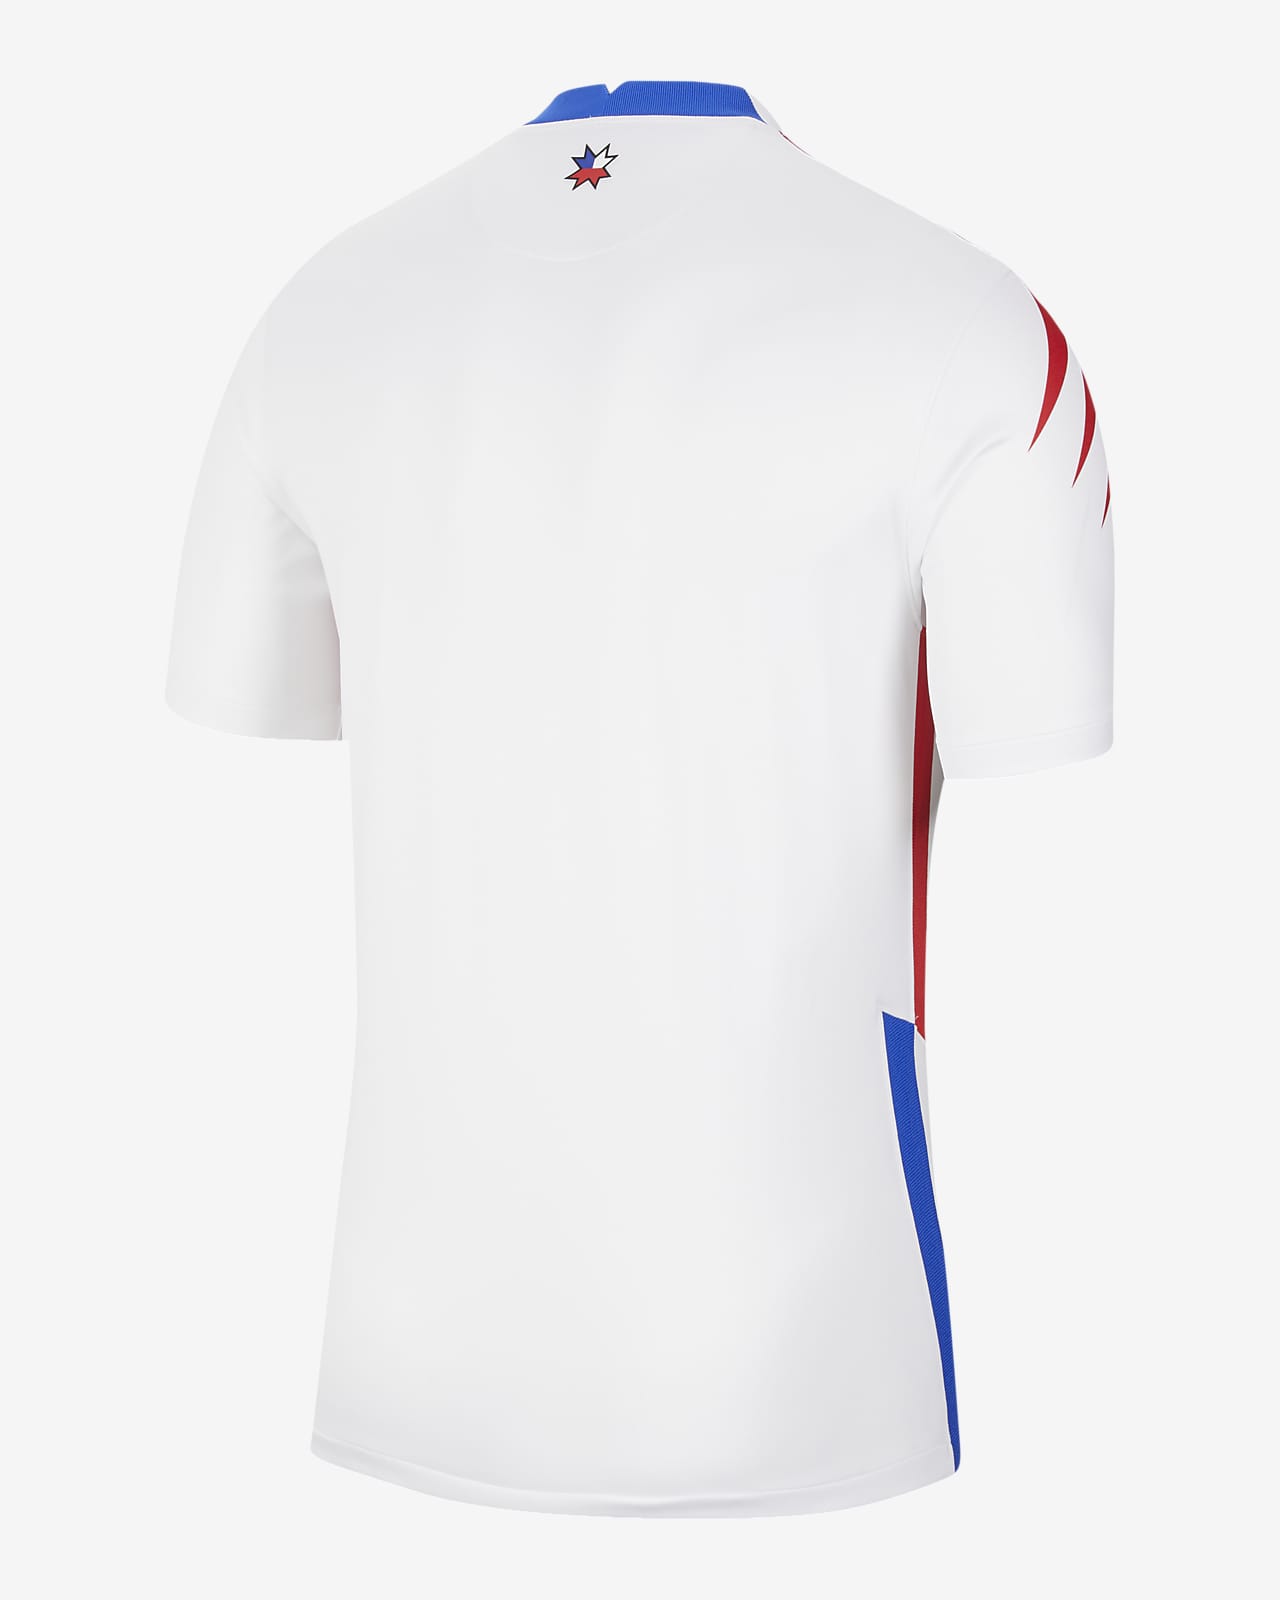 chile soccer jersey 2020